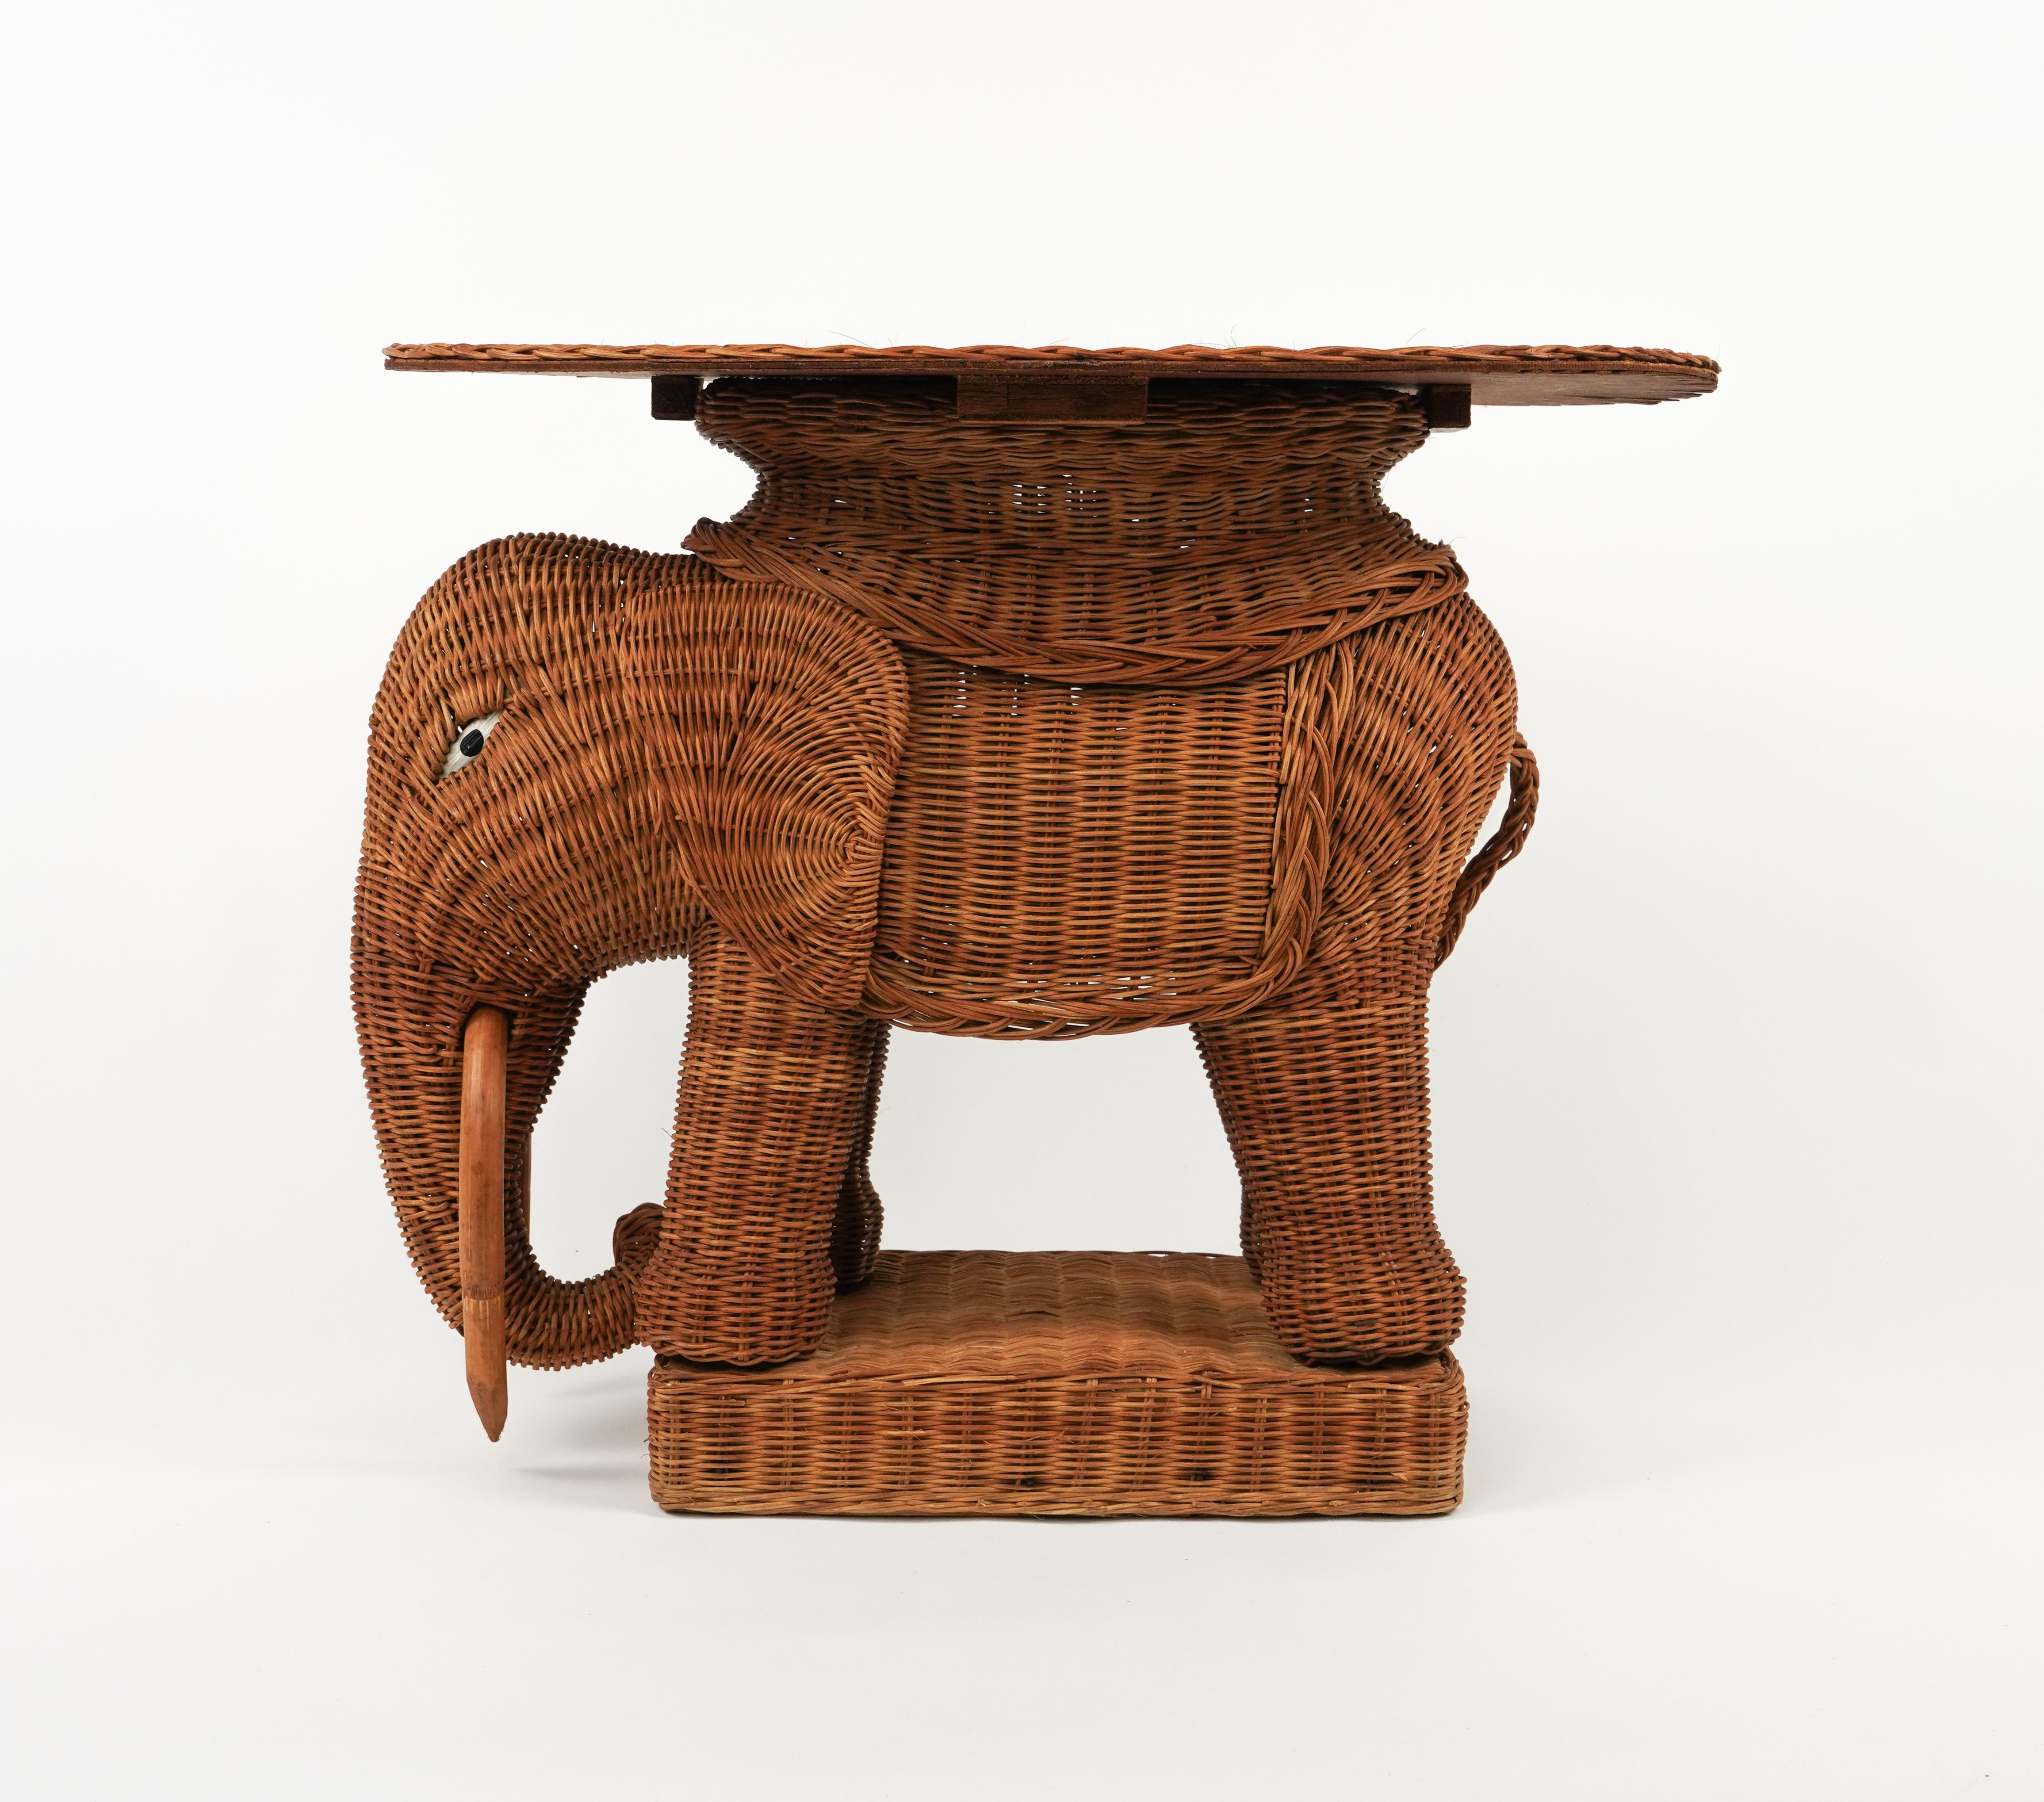 Rattan and Wicker Elephant Side Coffee Table Vivai Del Sud Style, Italy, 1960s For Sale 2